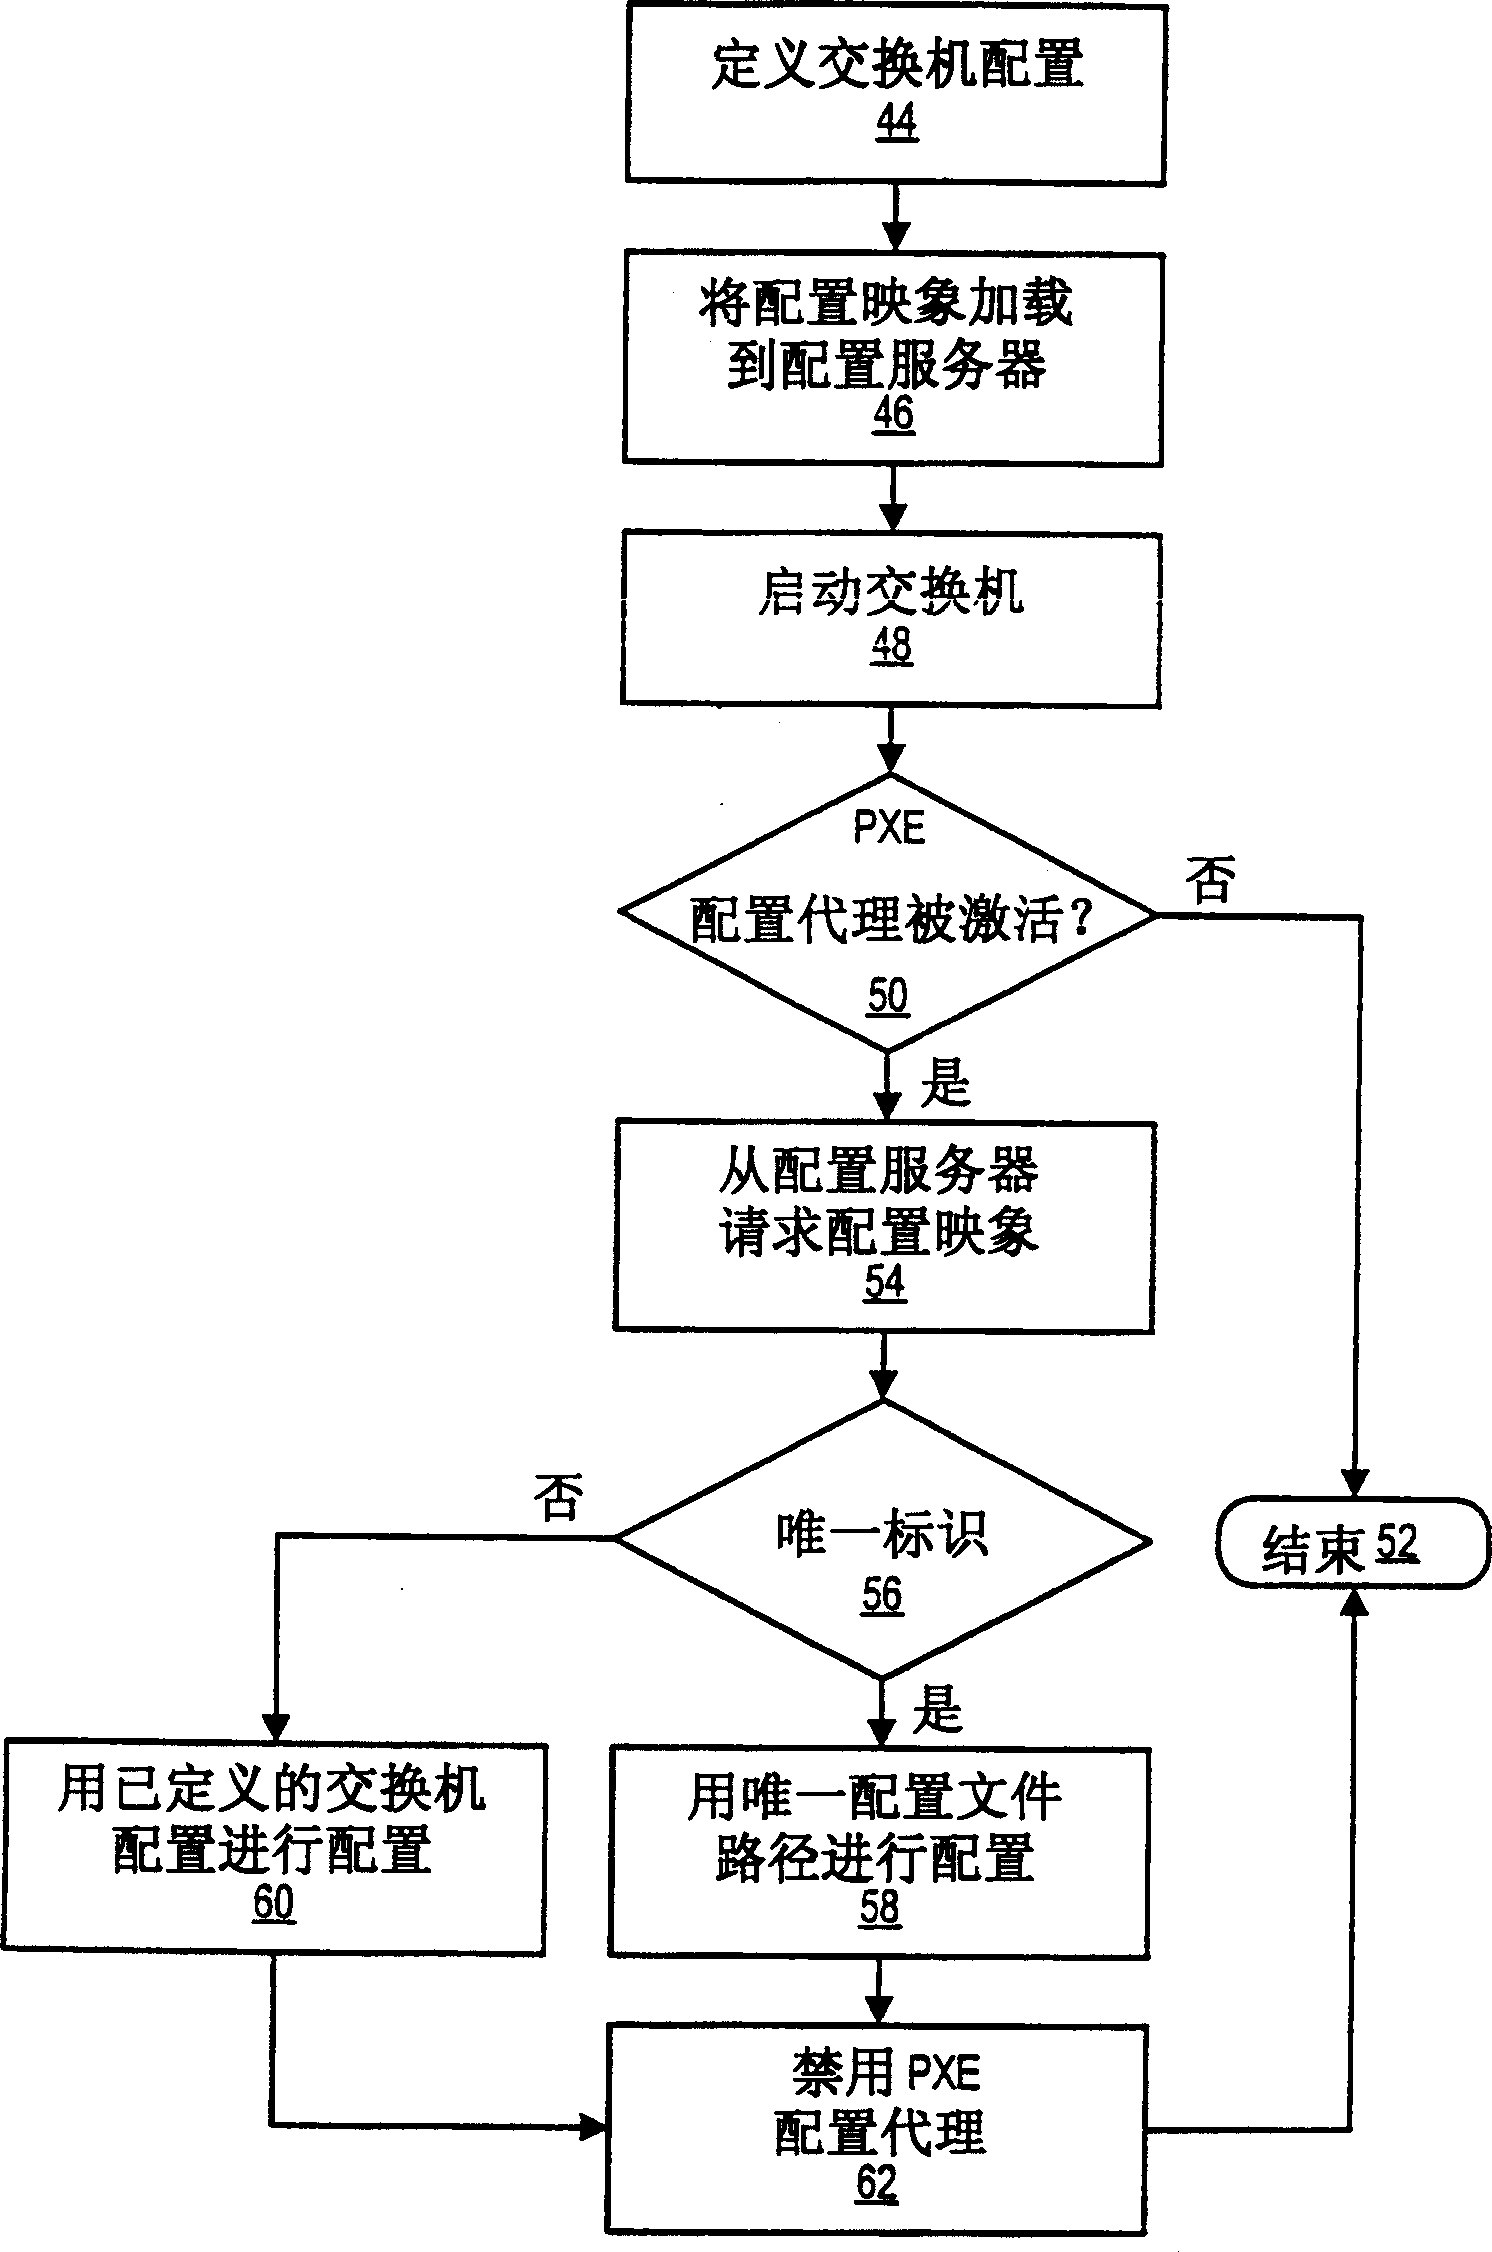 Network exchanger configuration method and system